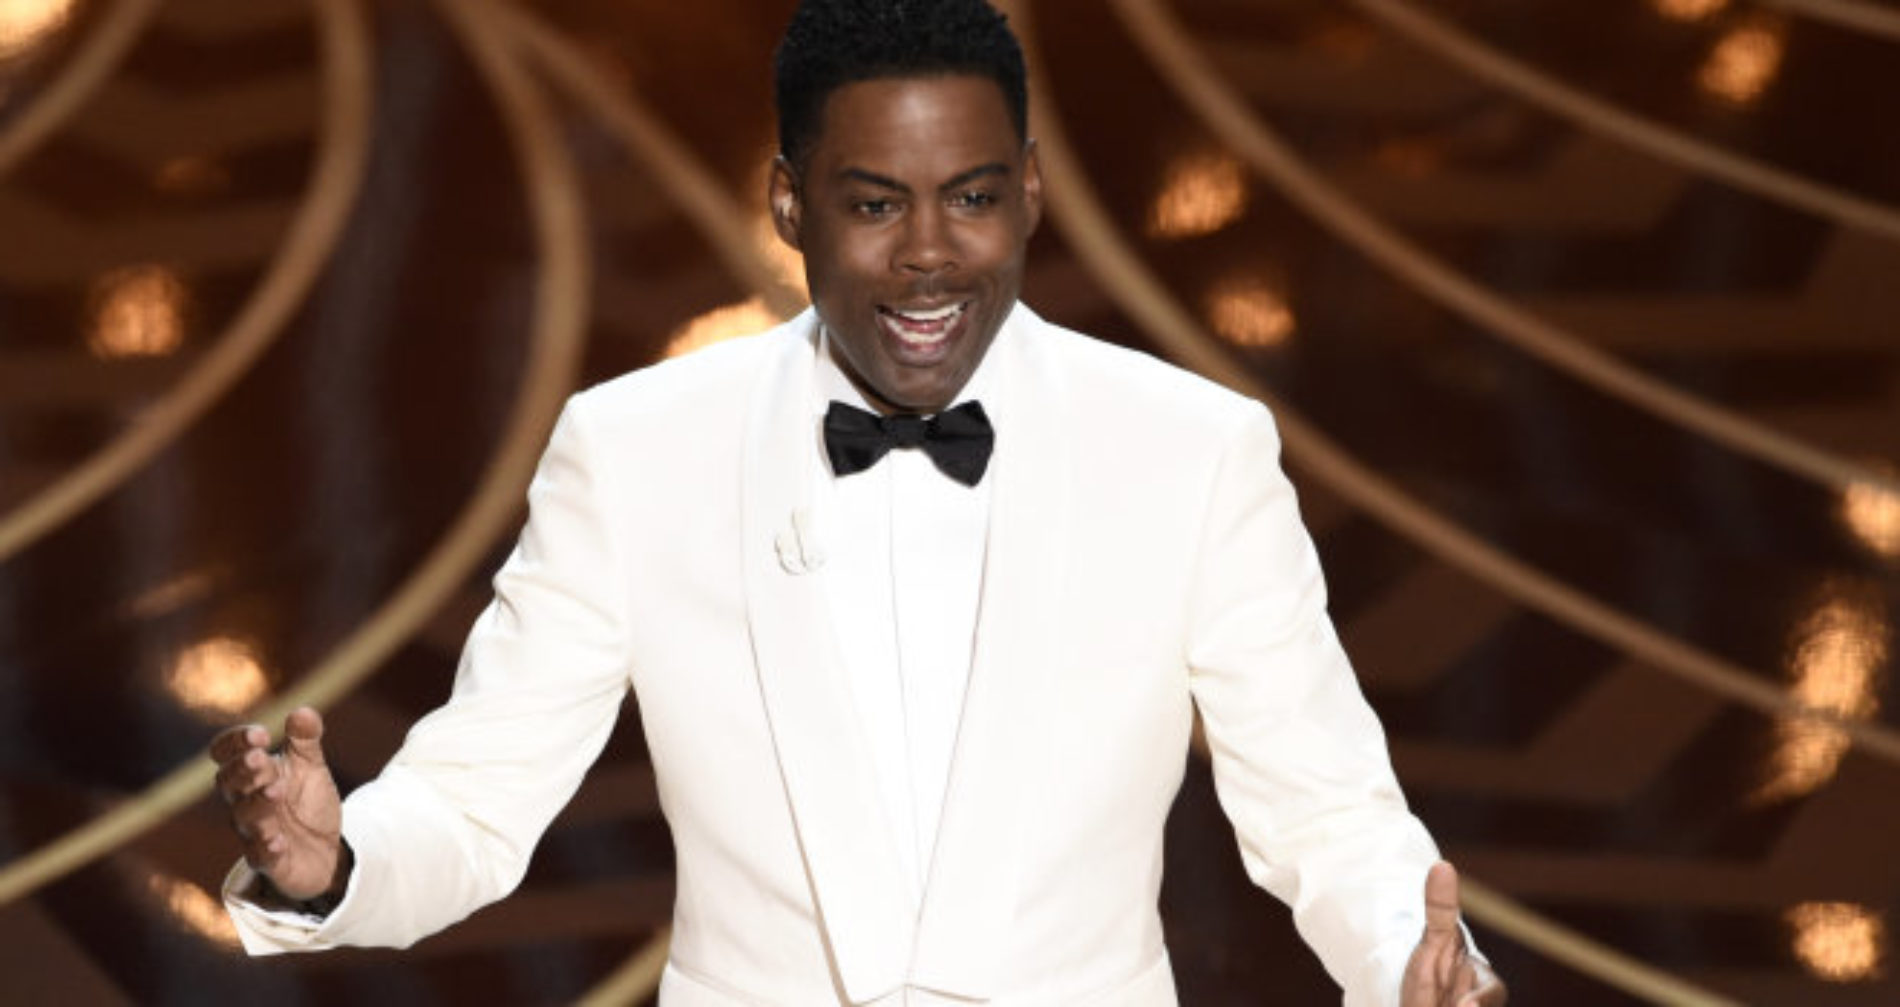 The Piece About Chris Rock’s Opening Monologue At The Oscars